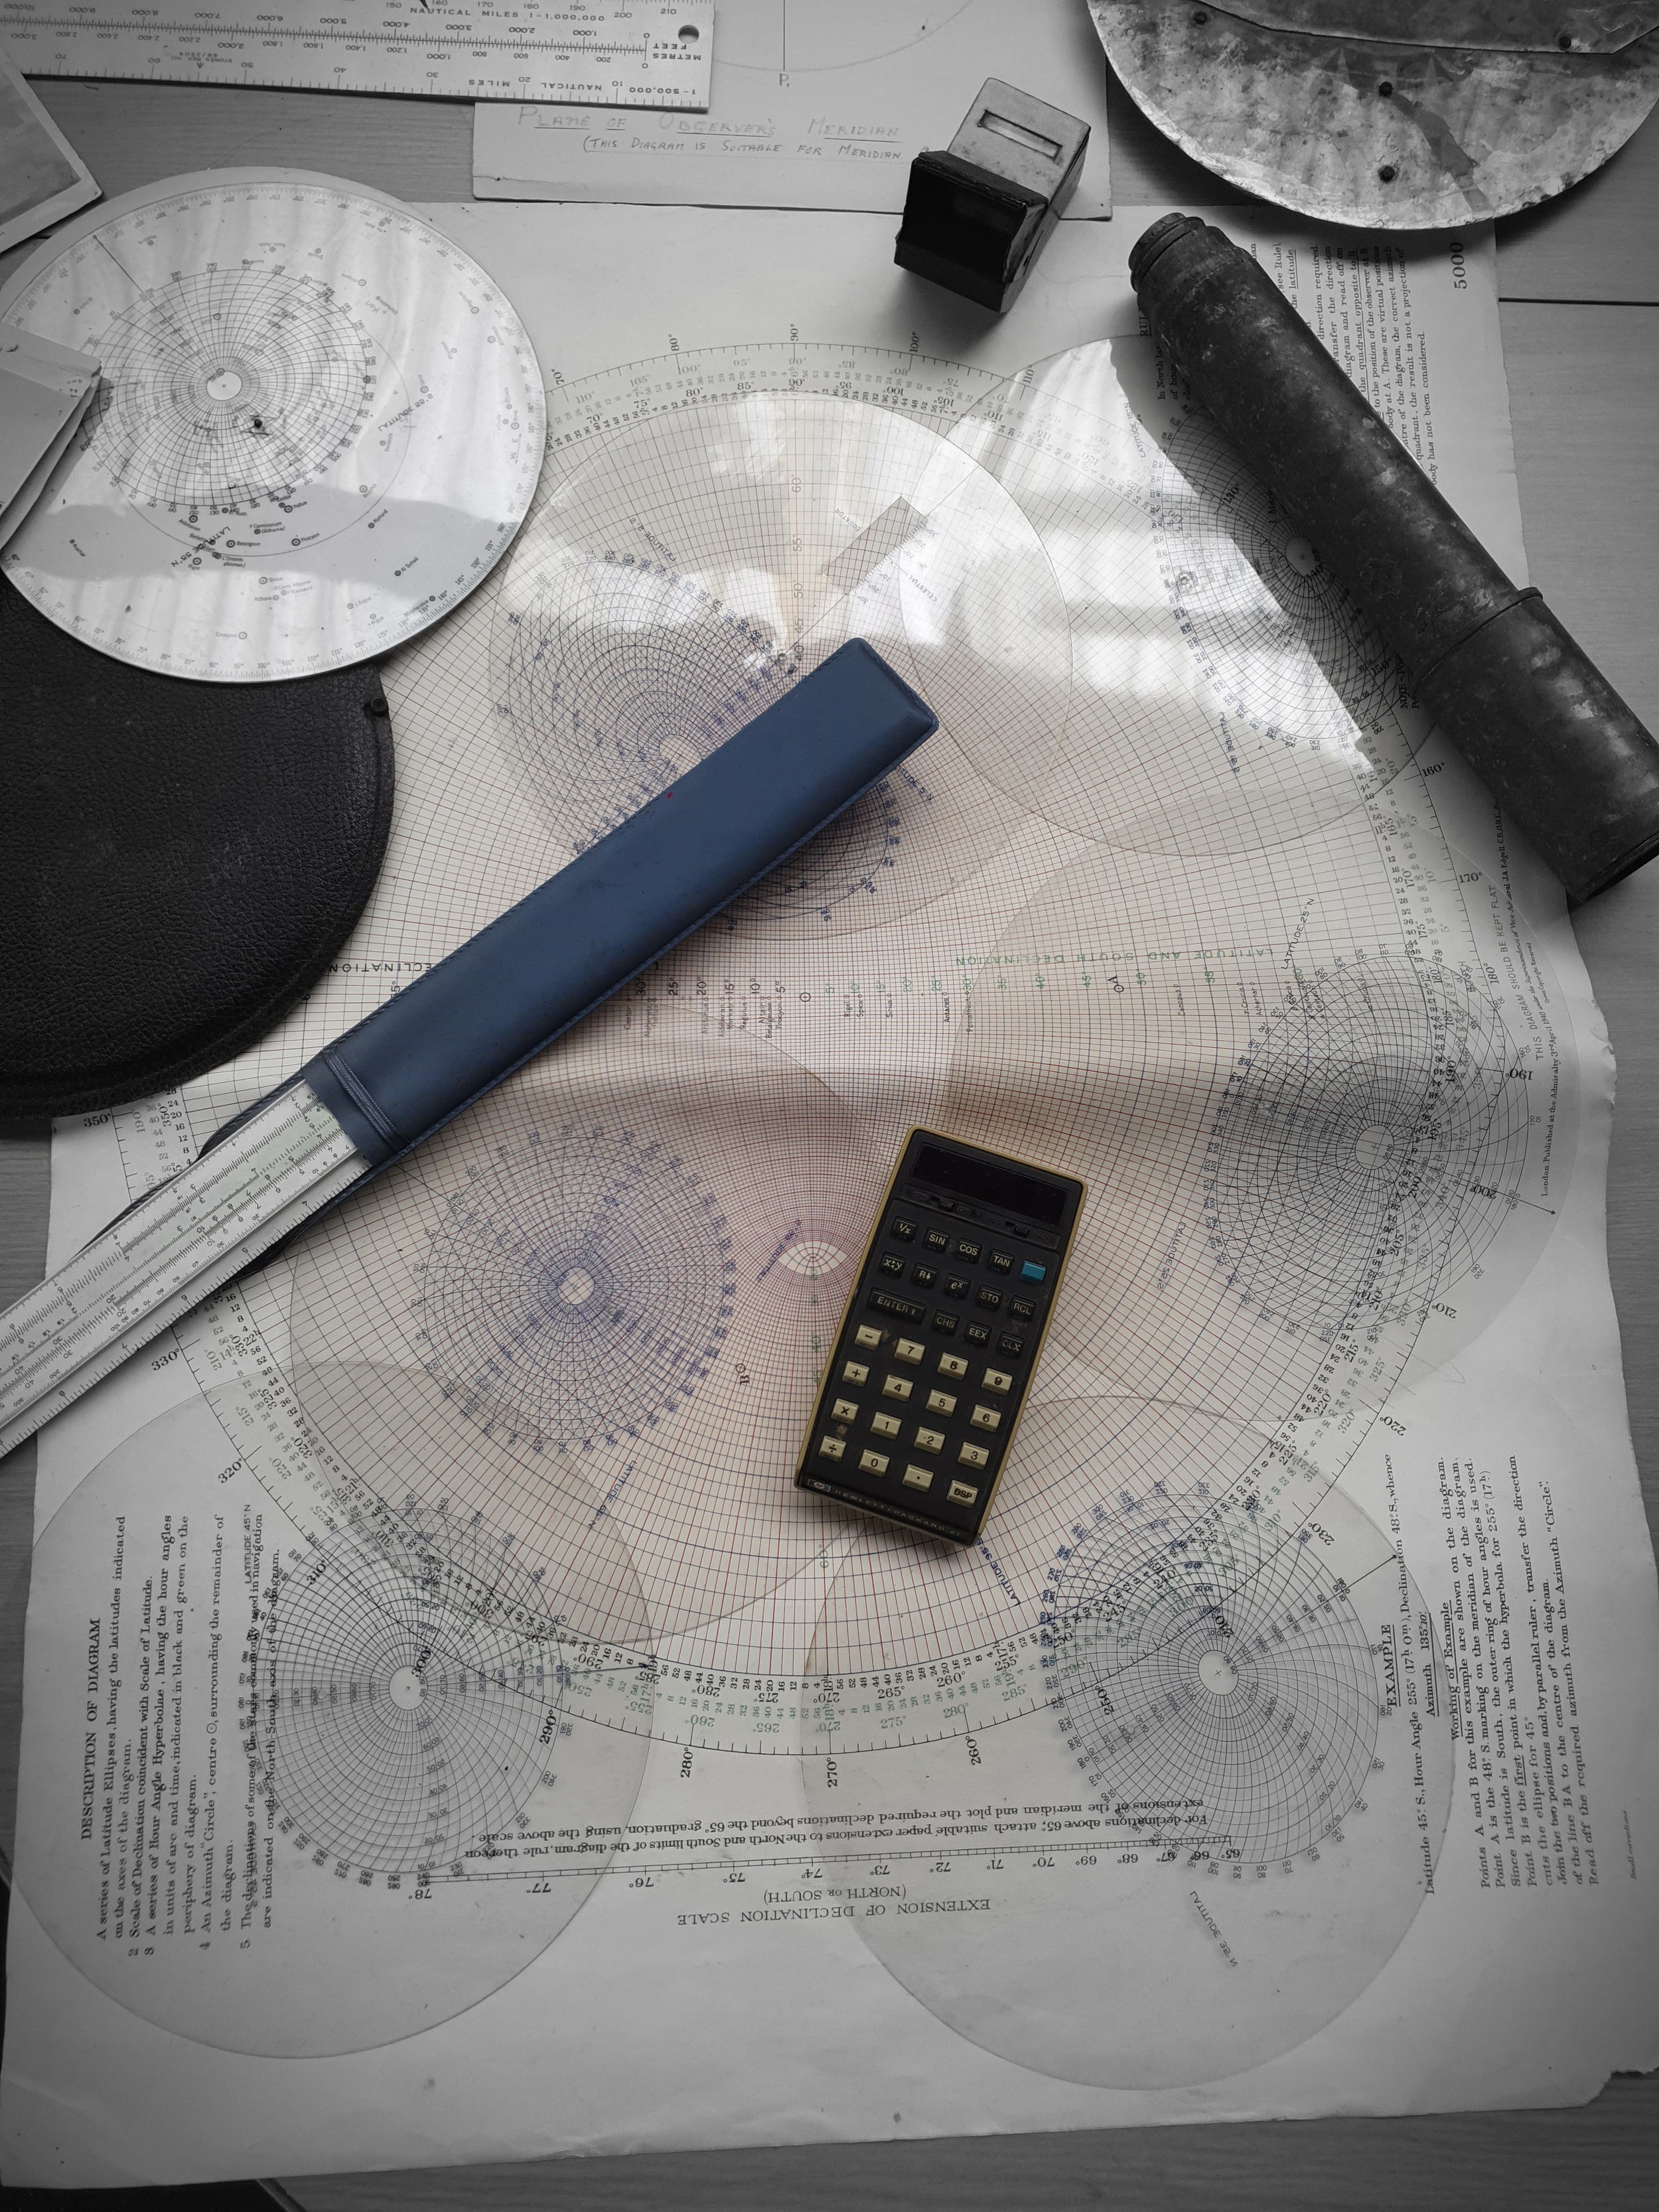 Vintage Star Charts, instruments, hand held telescope and Vintage calculator. - Image 4 of 5